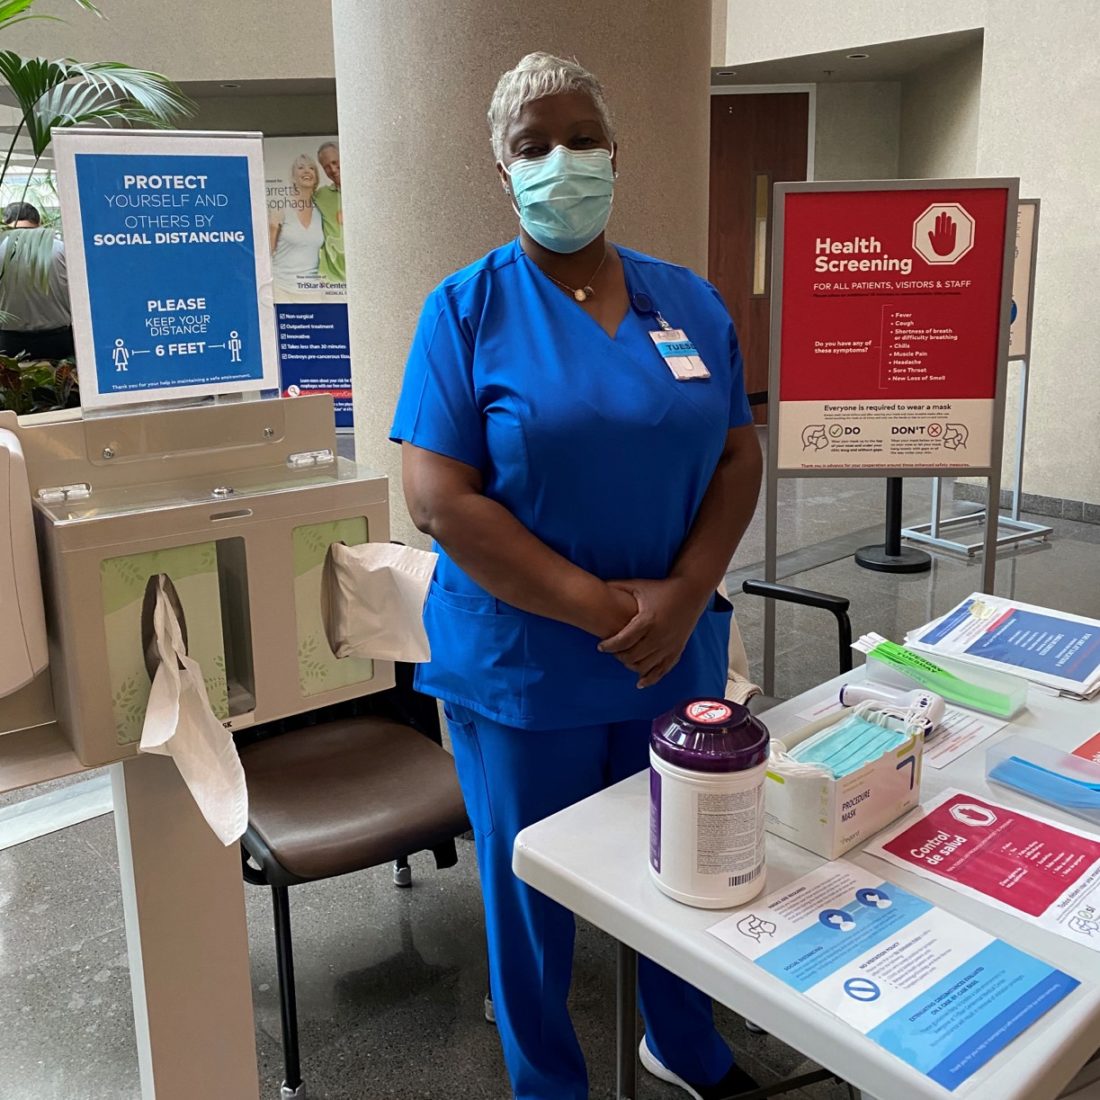 Woman wearing face mask and scrubs behind table with health screening materials.